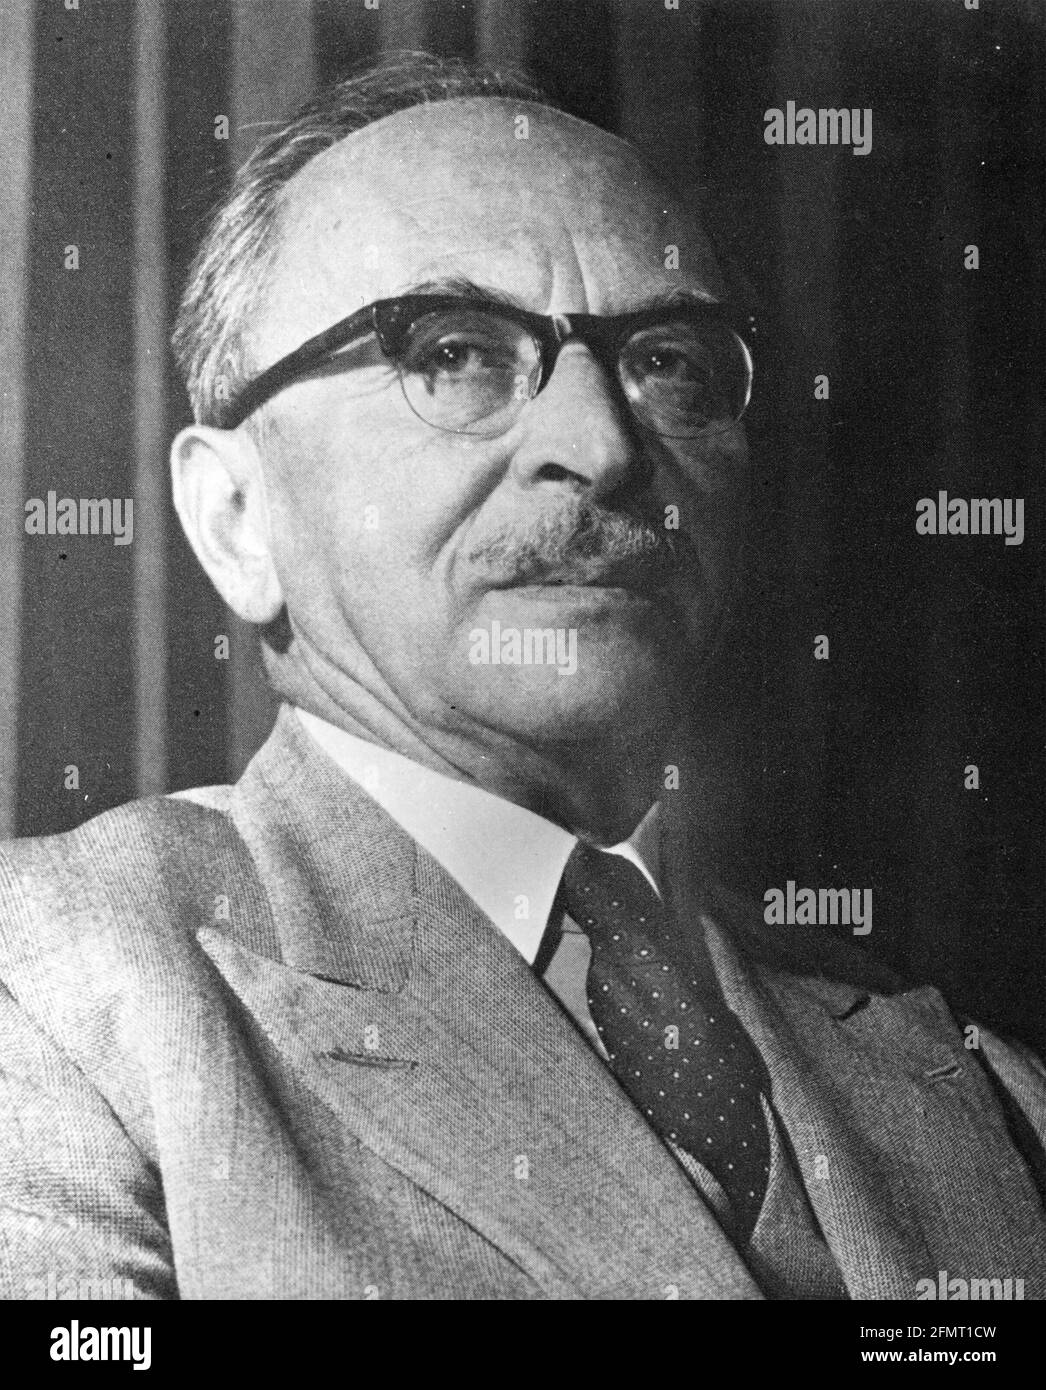 DENNIS GABOR (1900-1979) Anglo-Hungarian and electrical engineer who invented Photo: Siemens Stock Photo - Alamy